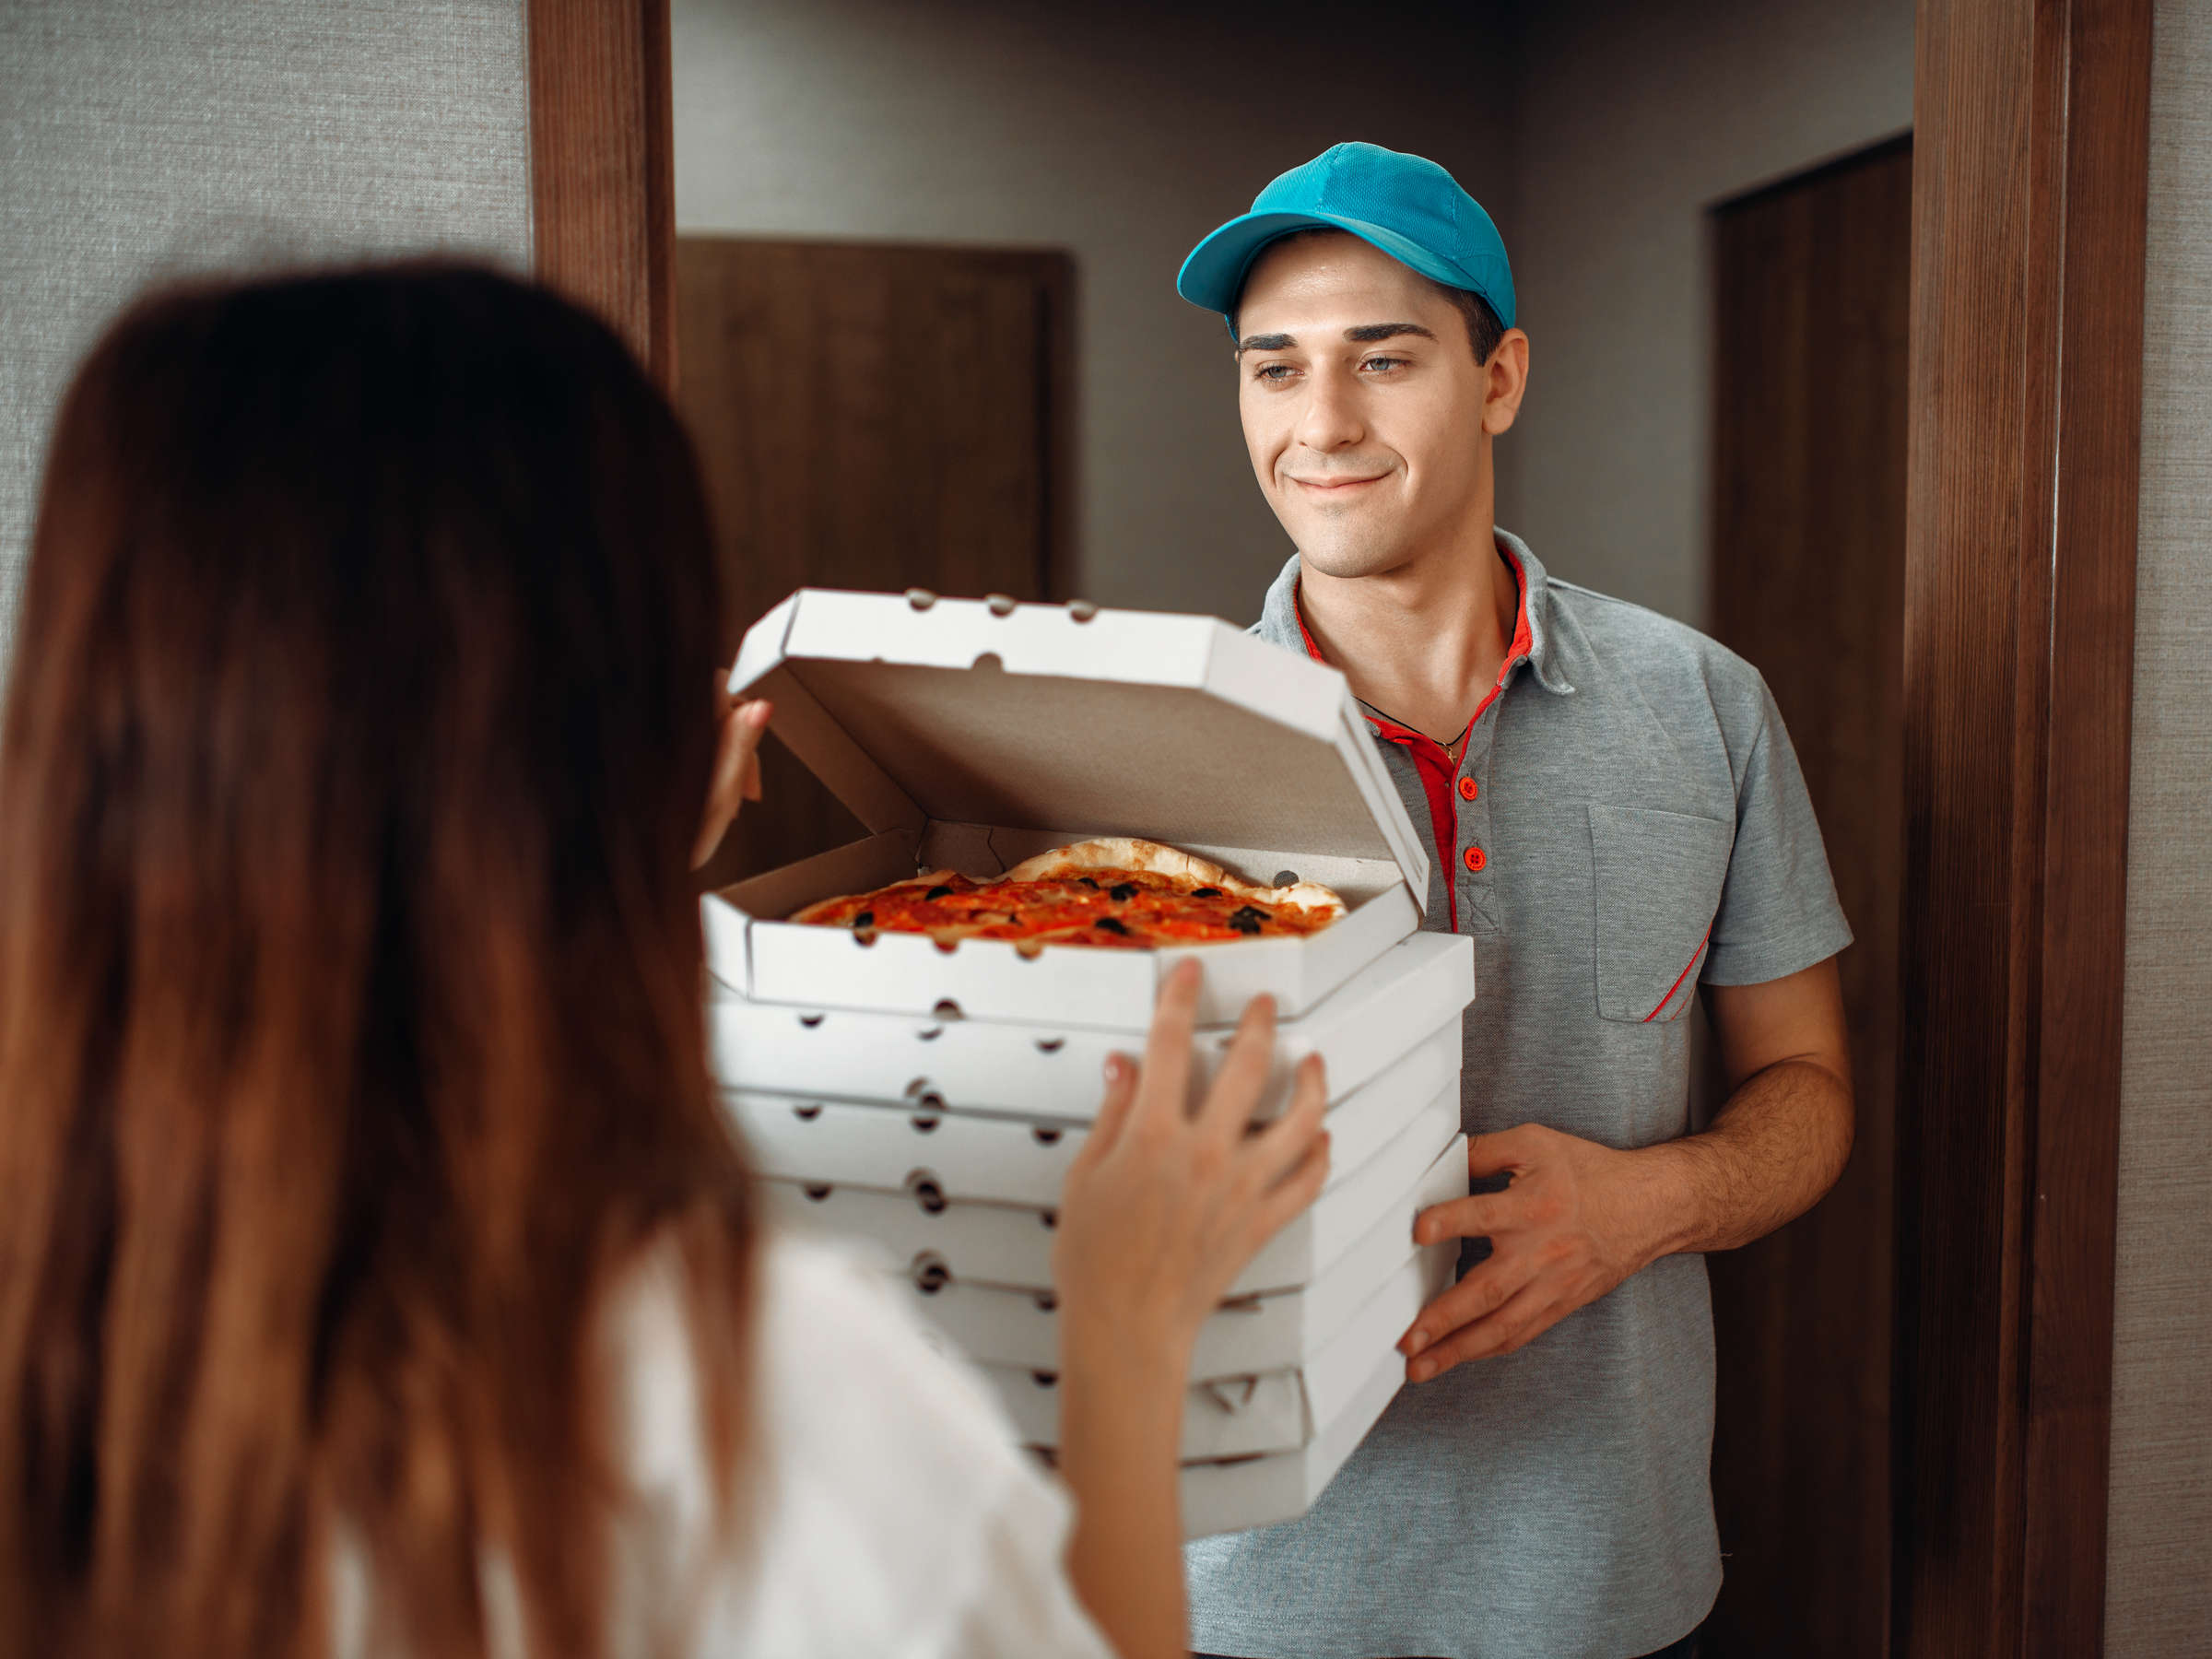 Delivery,Man,Shows,Pizza,To,Customer,At,The,Door